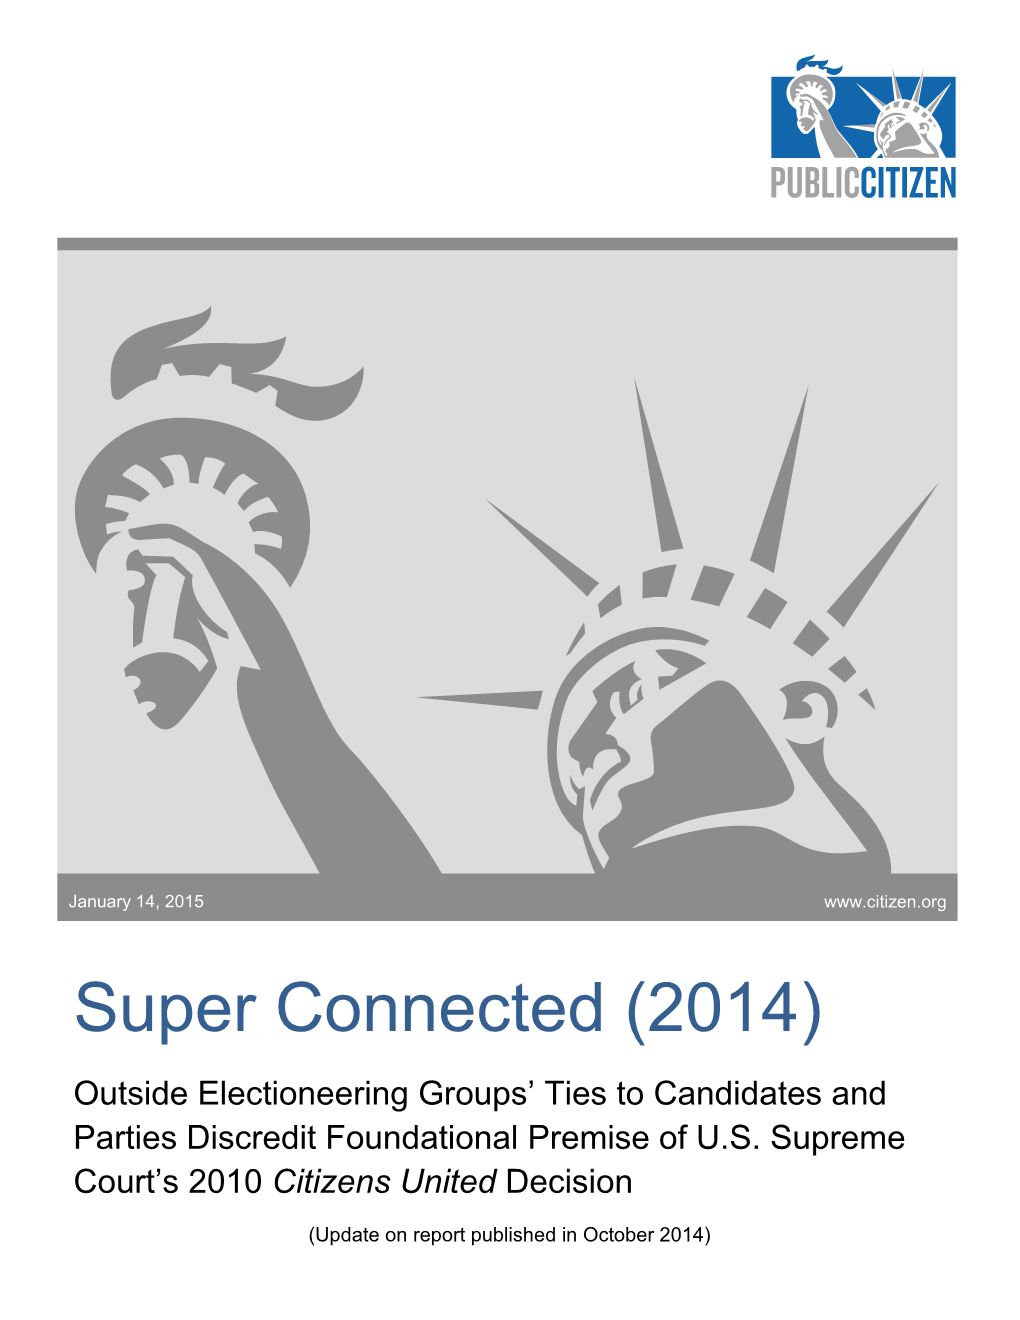 Super Connected (2014) Outside Electioneering Groups’ Ties to Candidates and Parties Discredit Foundational Premise of U.S